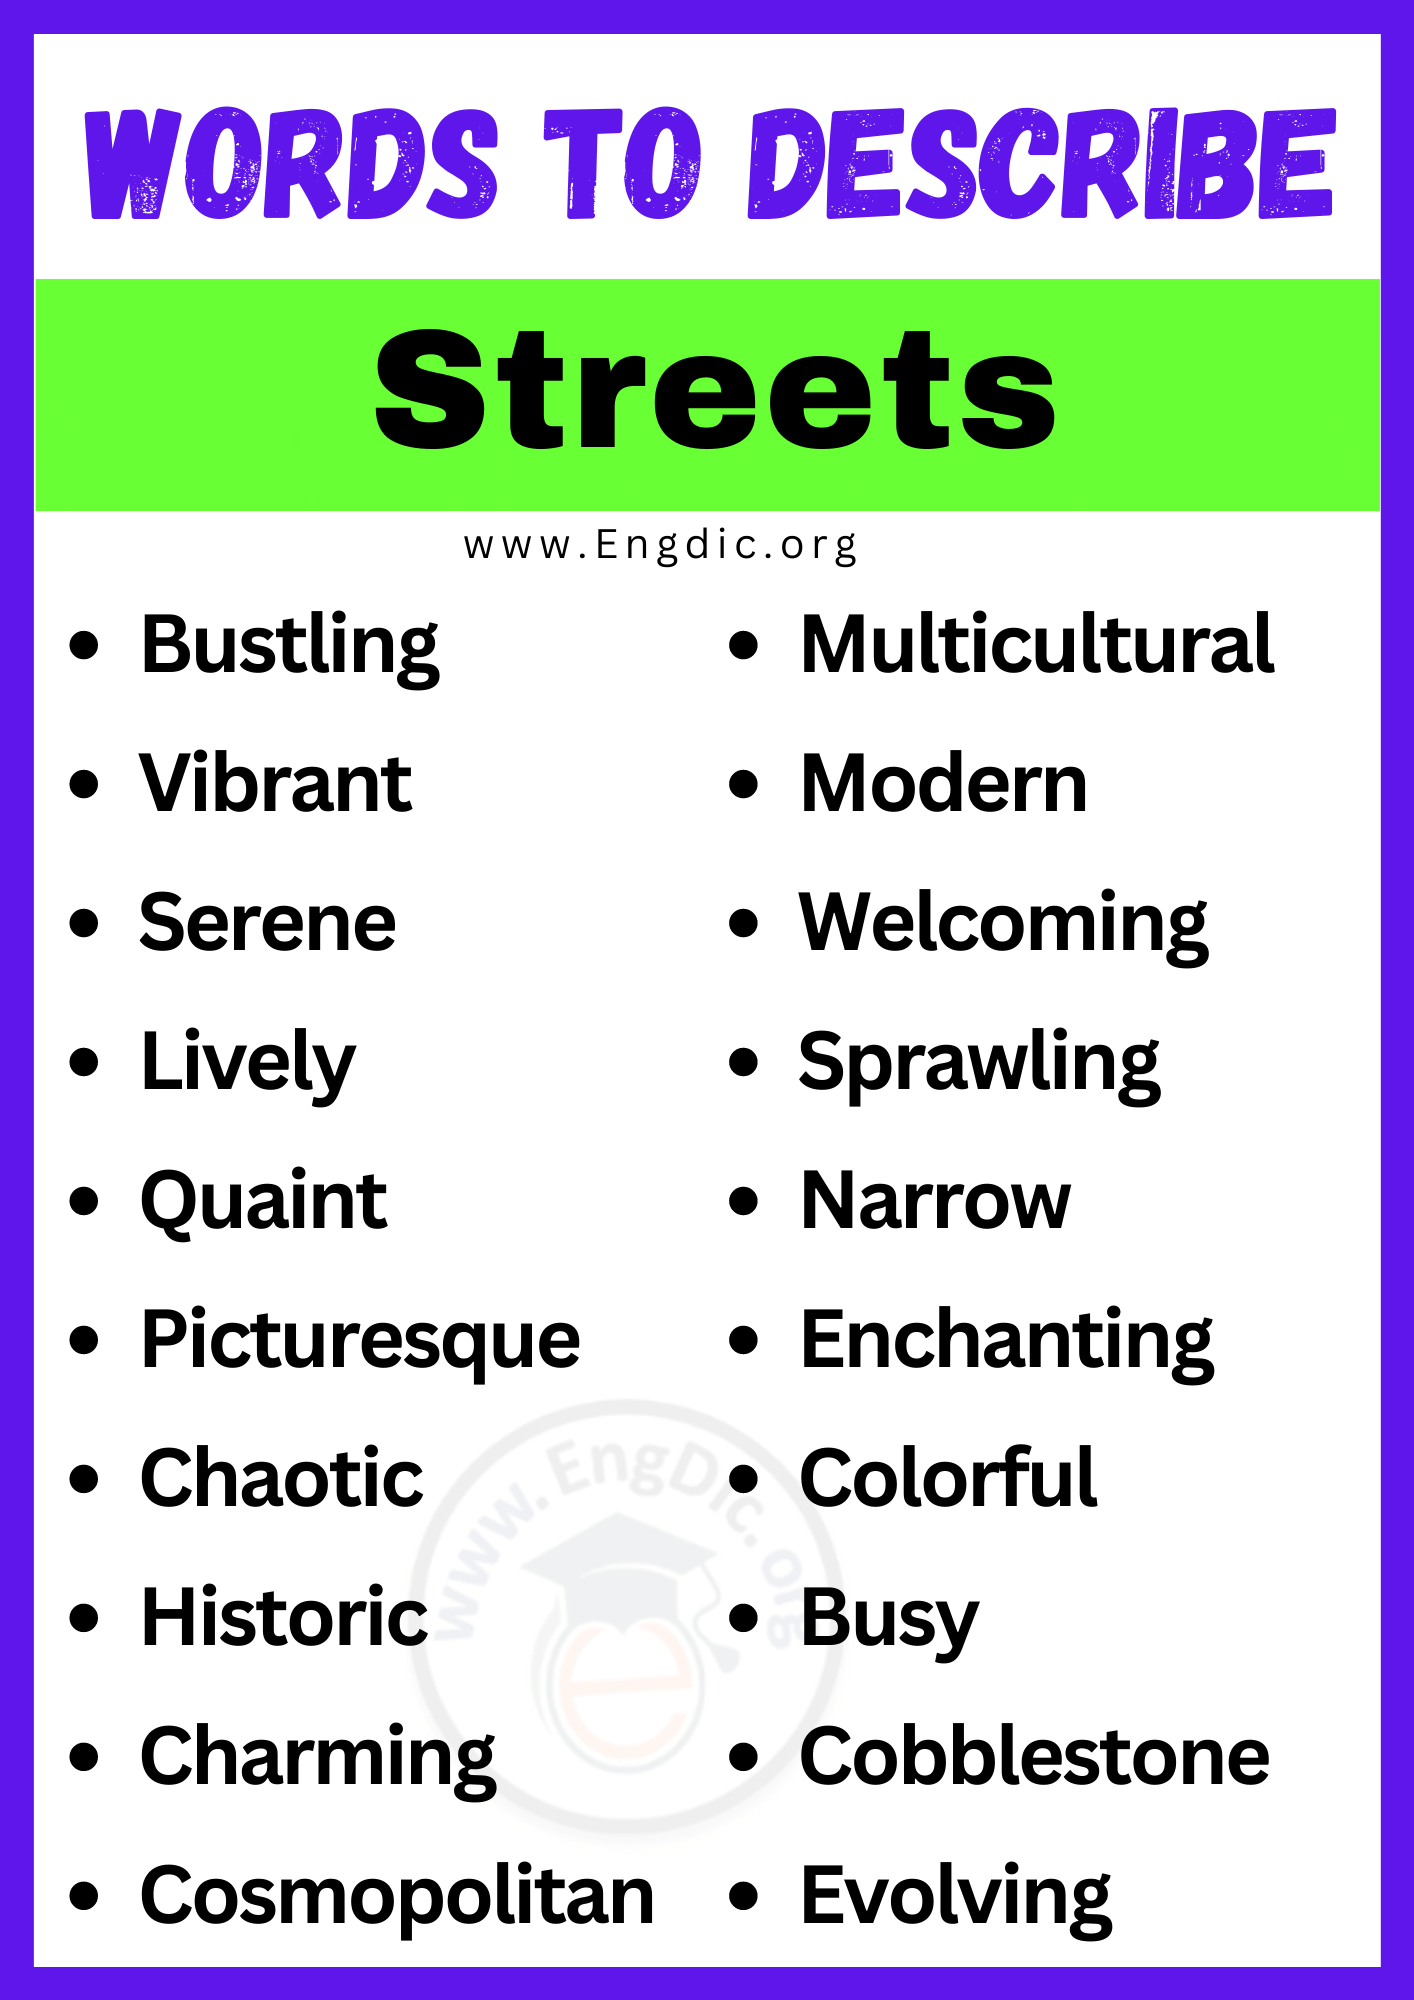 Words to Describe Streets